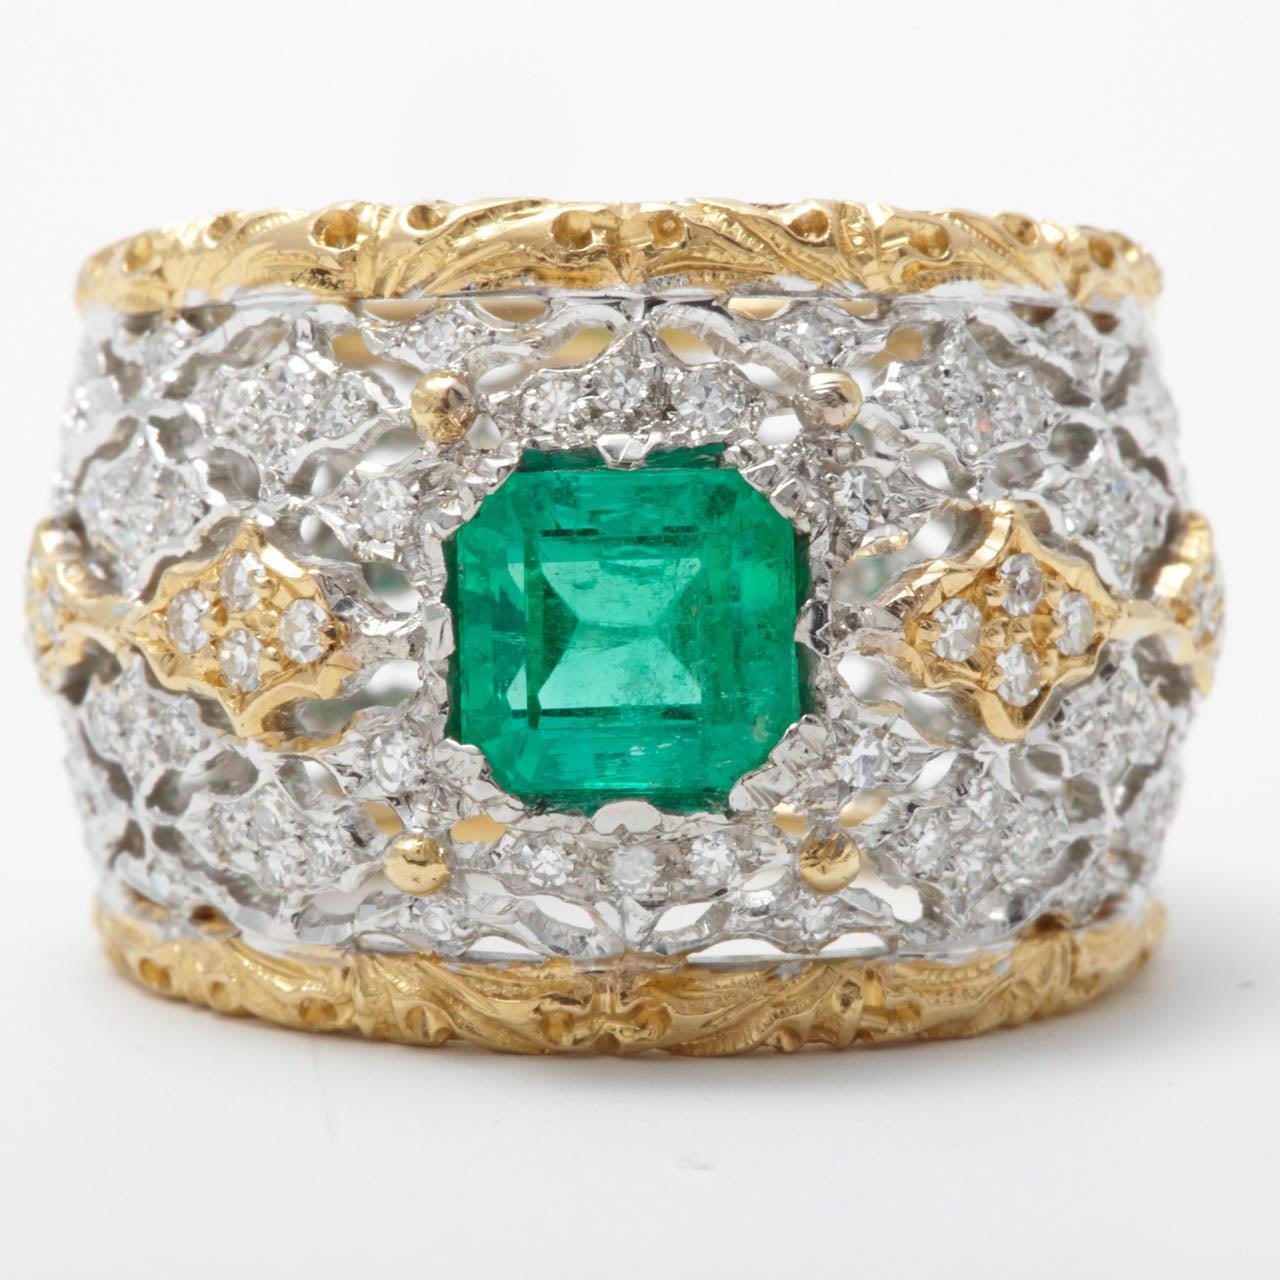 A gold, emerald and diamond dress ring, Buccellati
The cut-cornered emerald weighing  1.34 ct to a 18K white and yellow gold pierced band decorated with brilliant-cut diamonds.  Engraved Federico Buccellati.  Ring size 6 1/4 - 16 3/4.

All of our